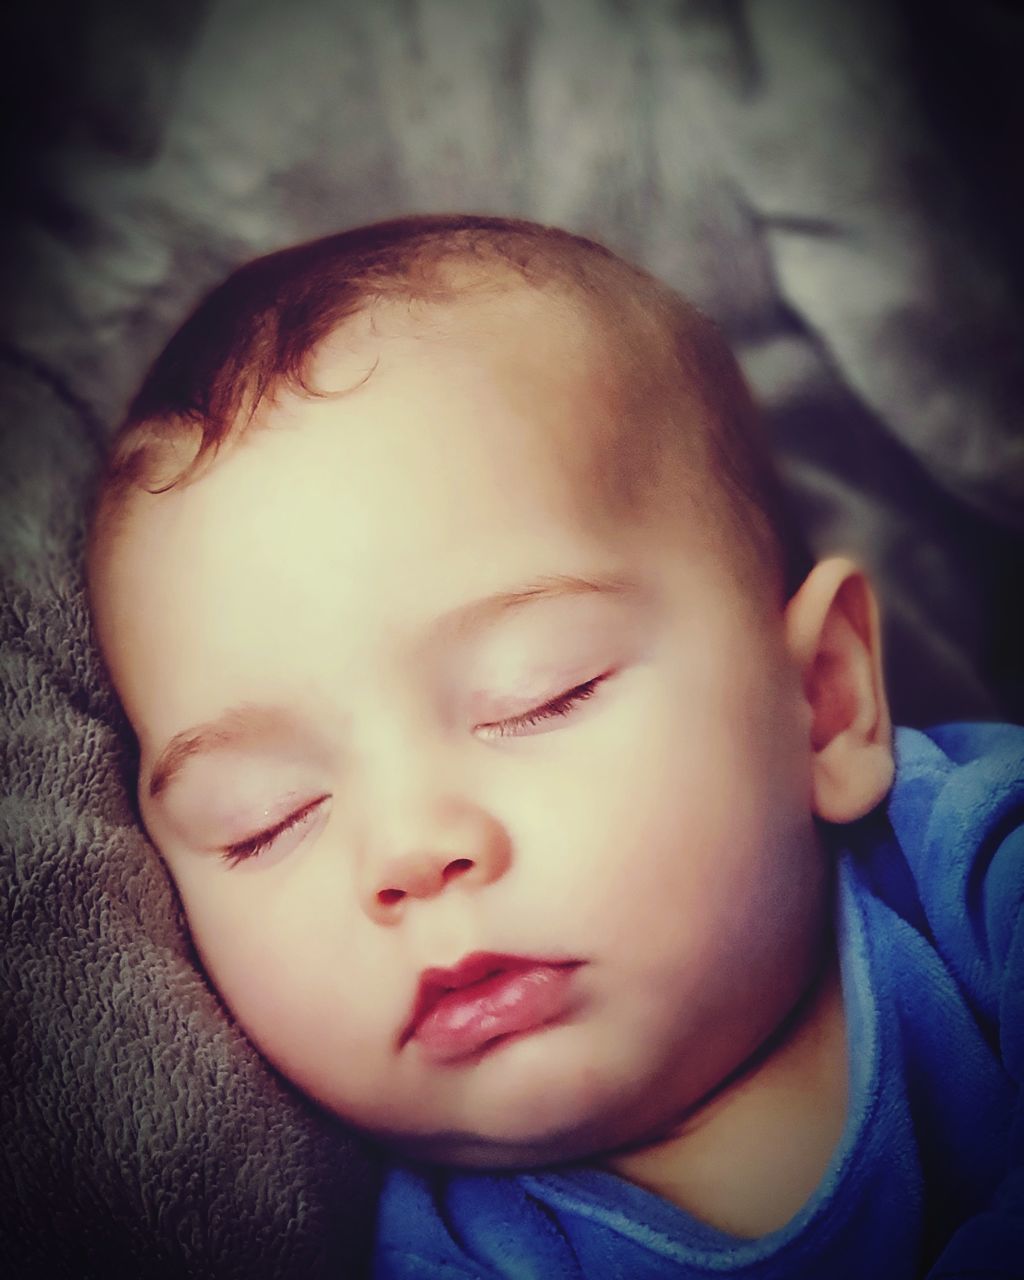 CLOSE-UP PORTRAIT OF CUTE BABY SLEEPING